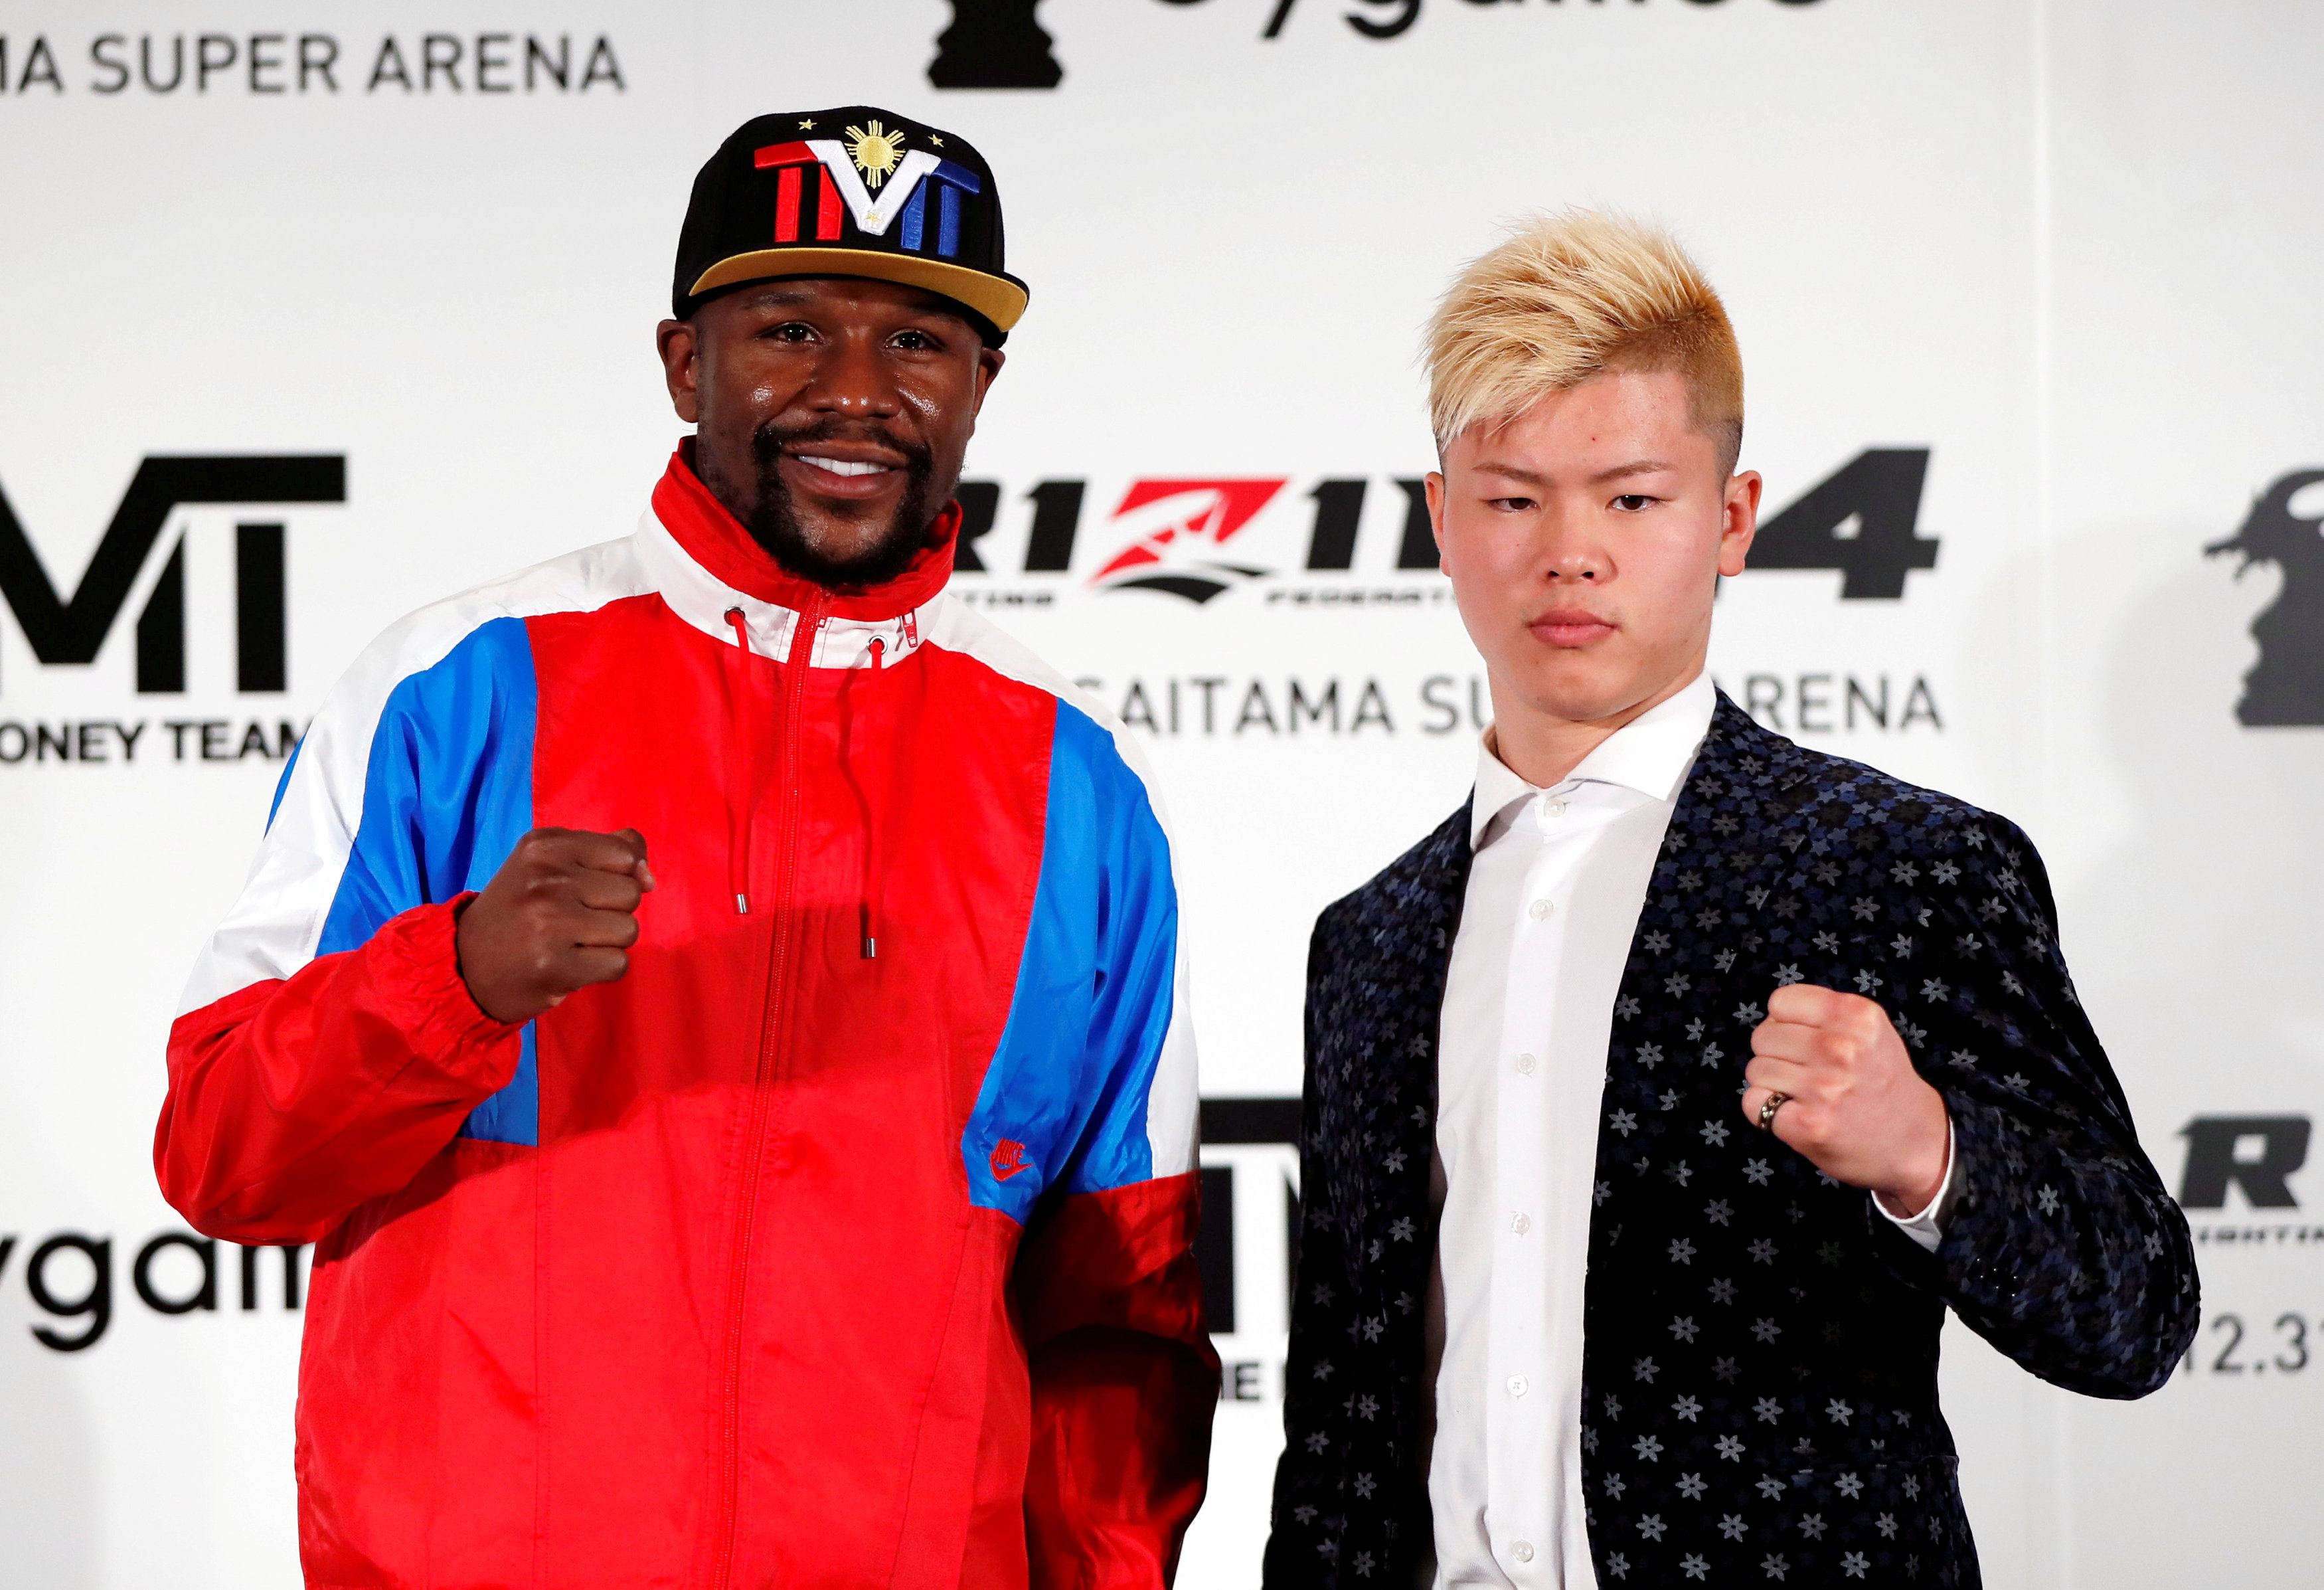 Boxer Floyd Mayweather Jr. of the U.S. poses for a photograph with his opponent Tenshin Nasukawa during a news conference in Tokyo